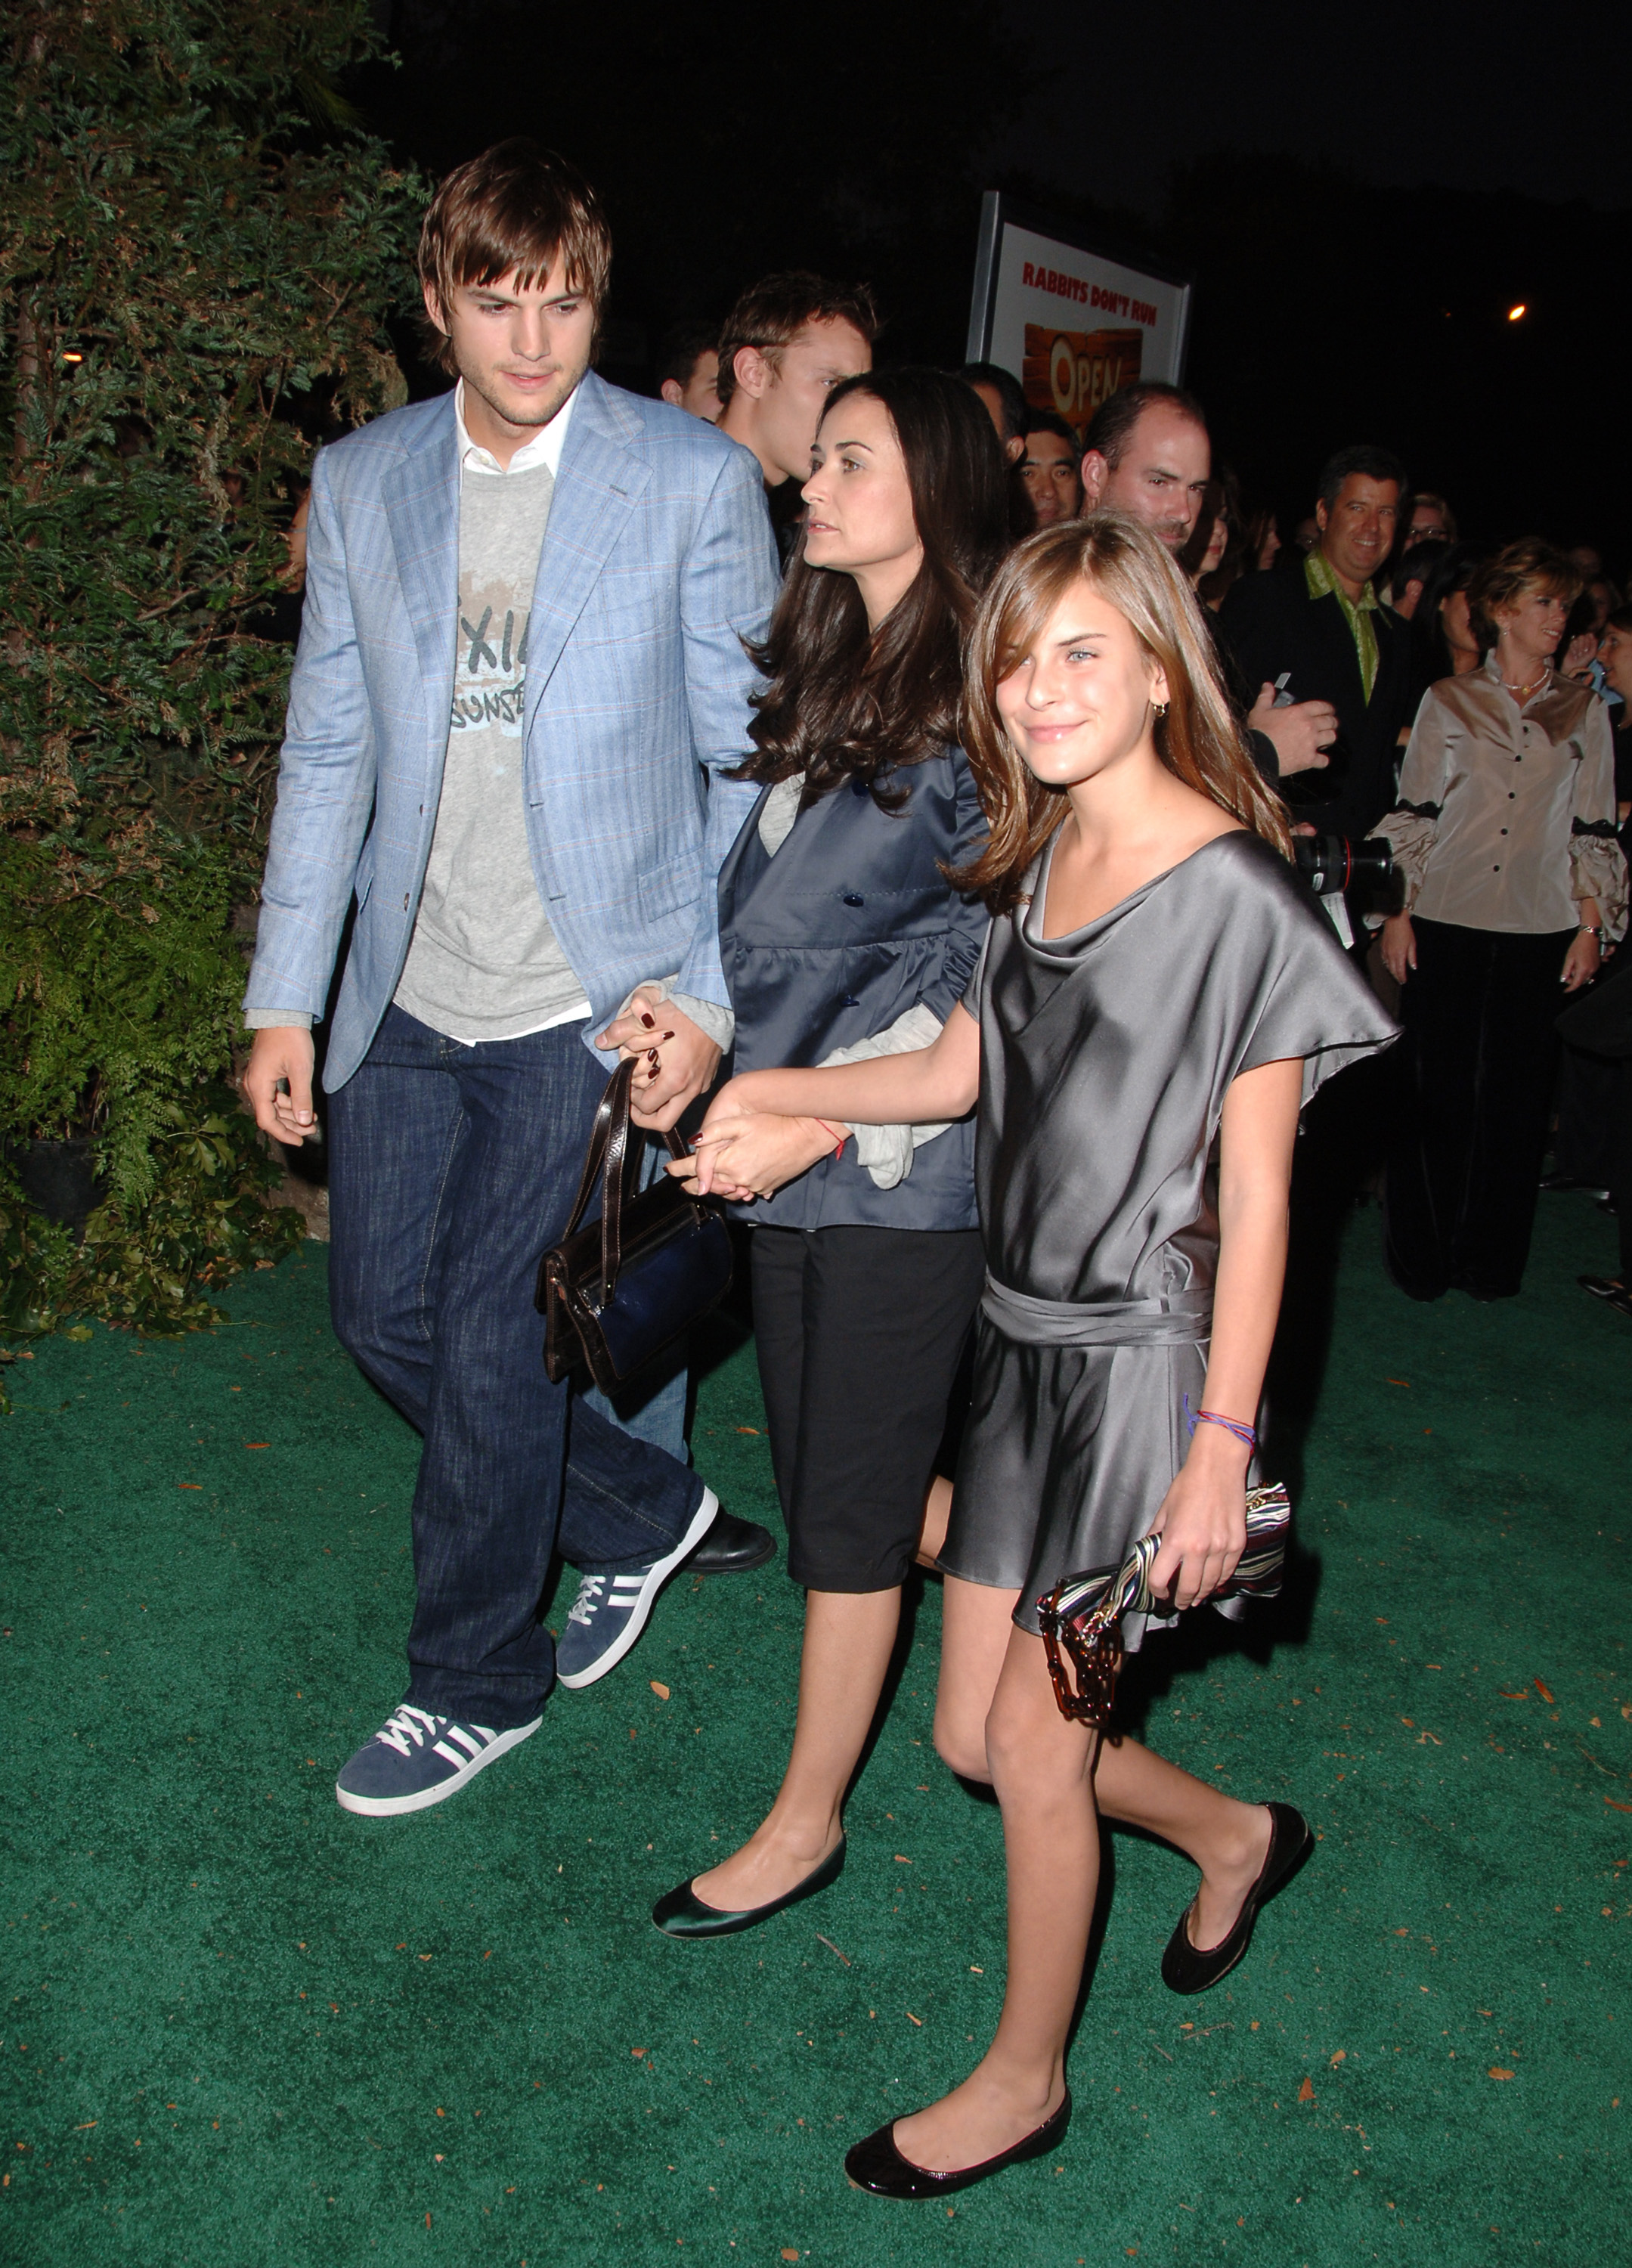 Ashton Kutcher, Demi Moore and Tallullah Willis at the "Open Season" premiere in Los Angeles, 2006 | Source: Getty images